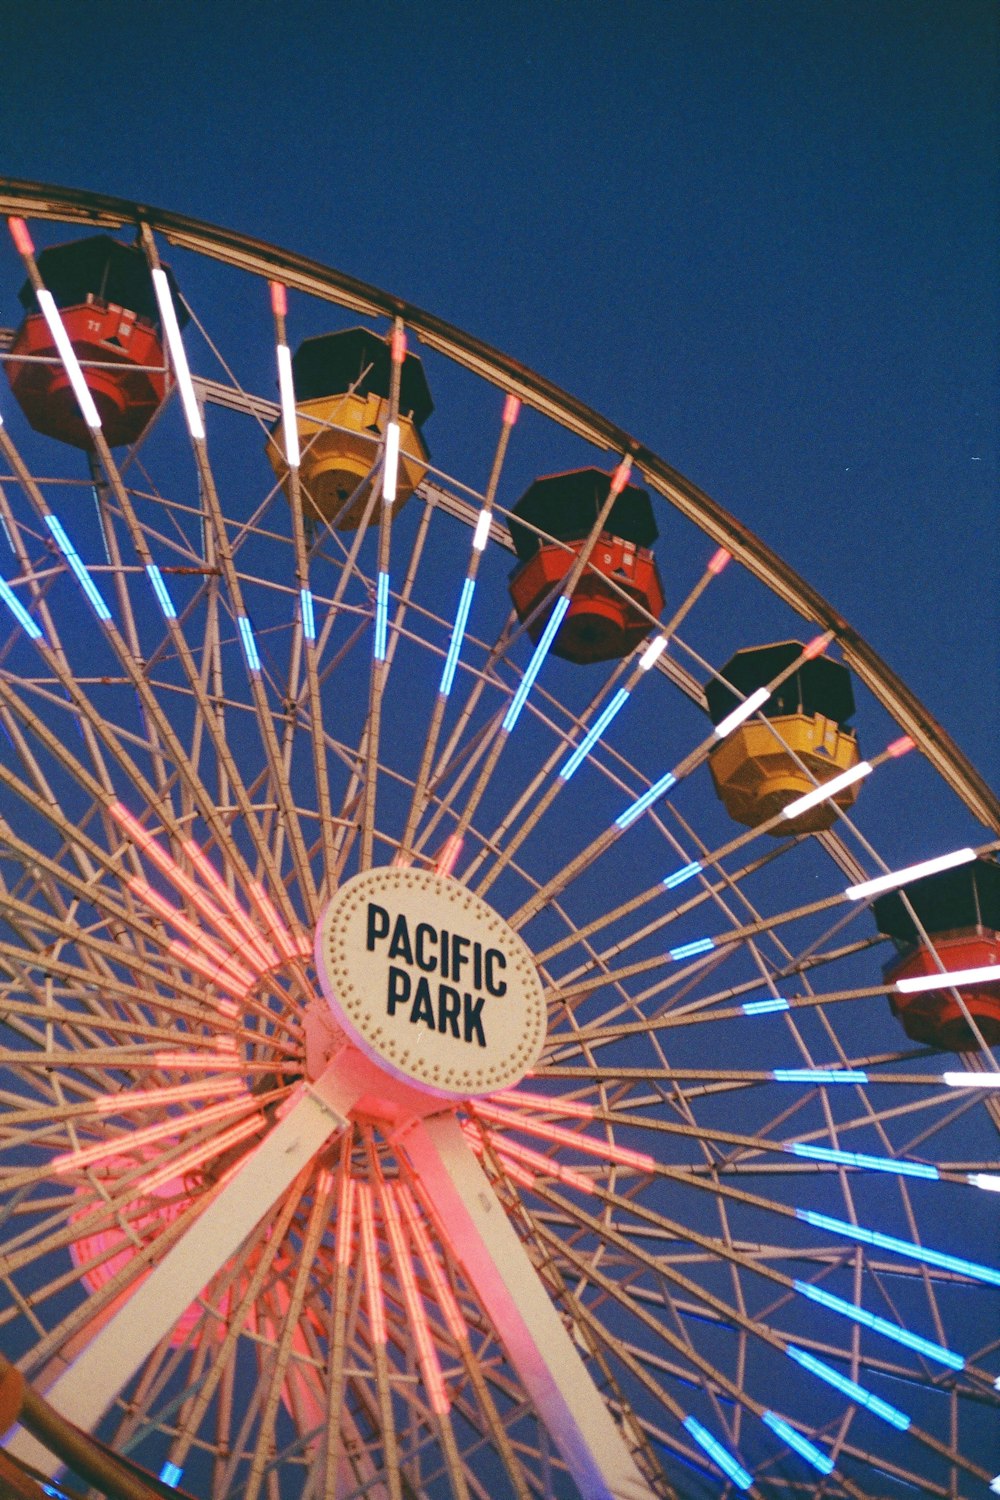 a ferris wheel with a sign that says pacific park